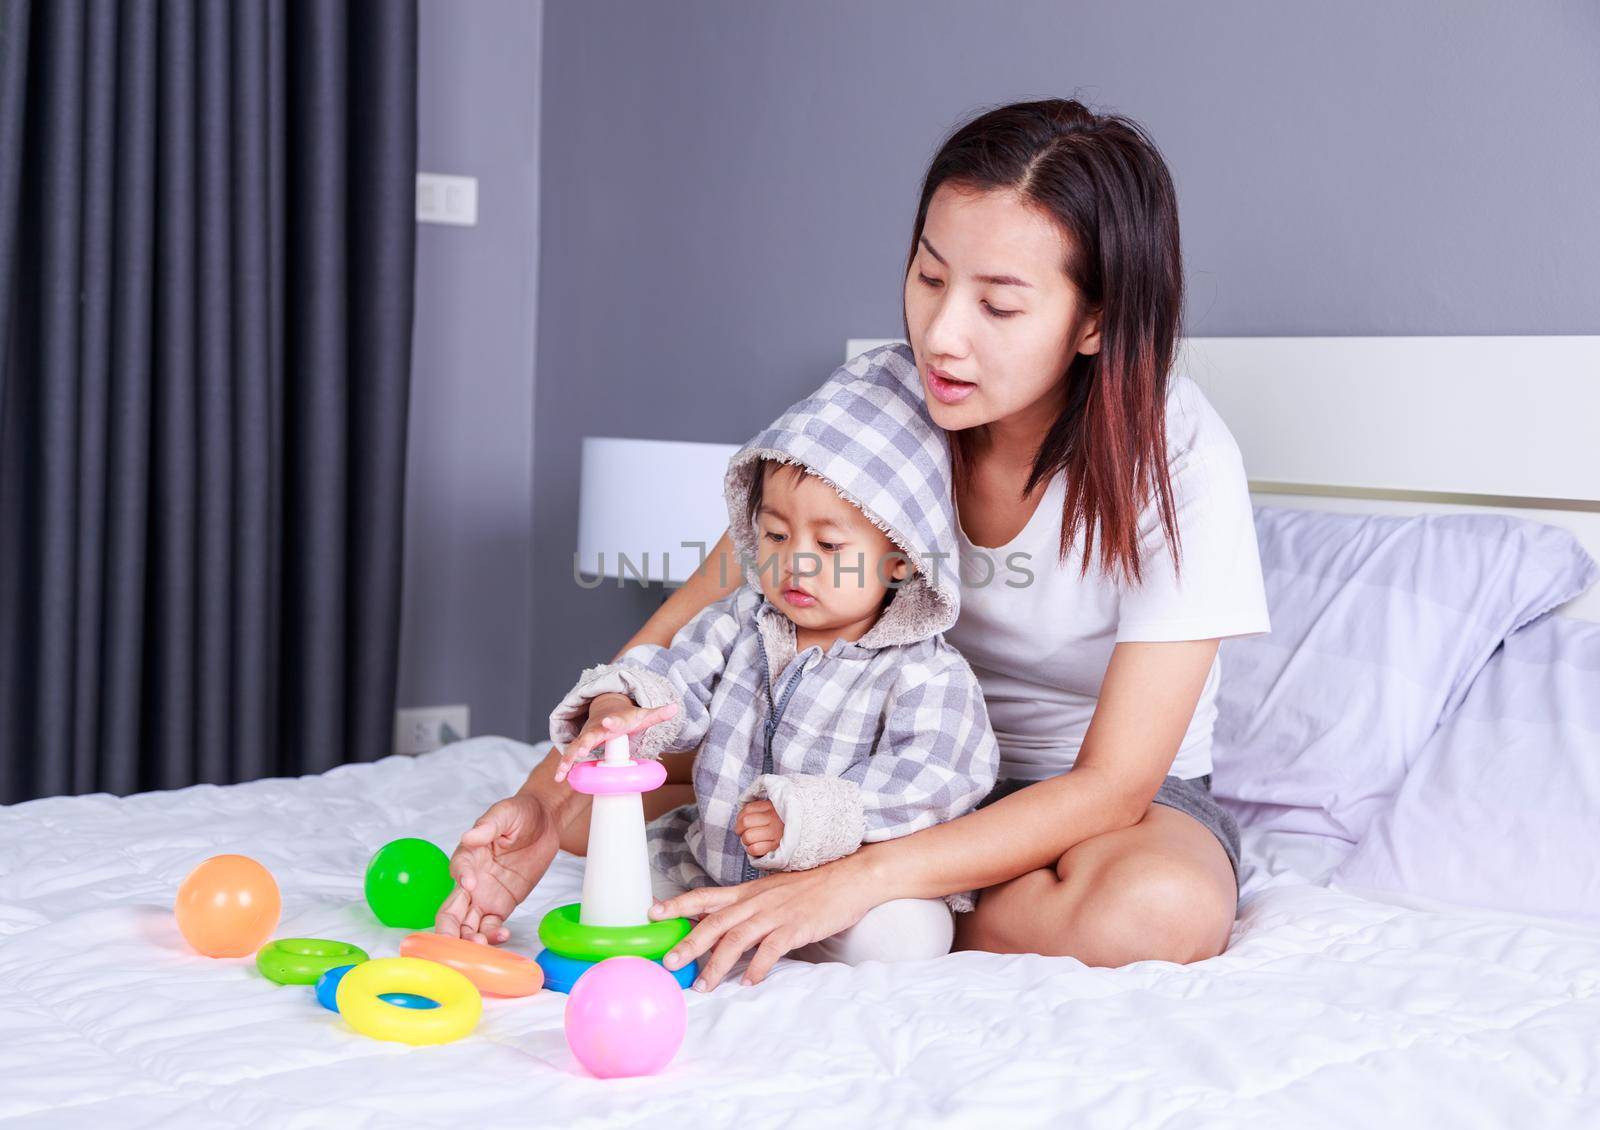 baby playing toys with mother on bed at home